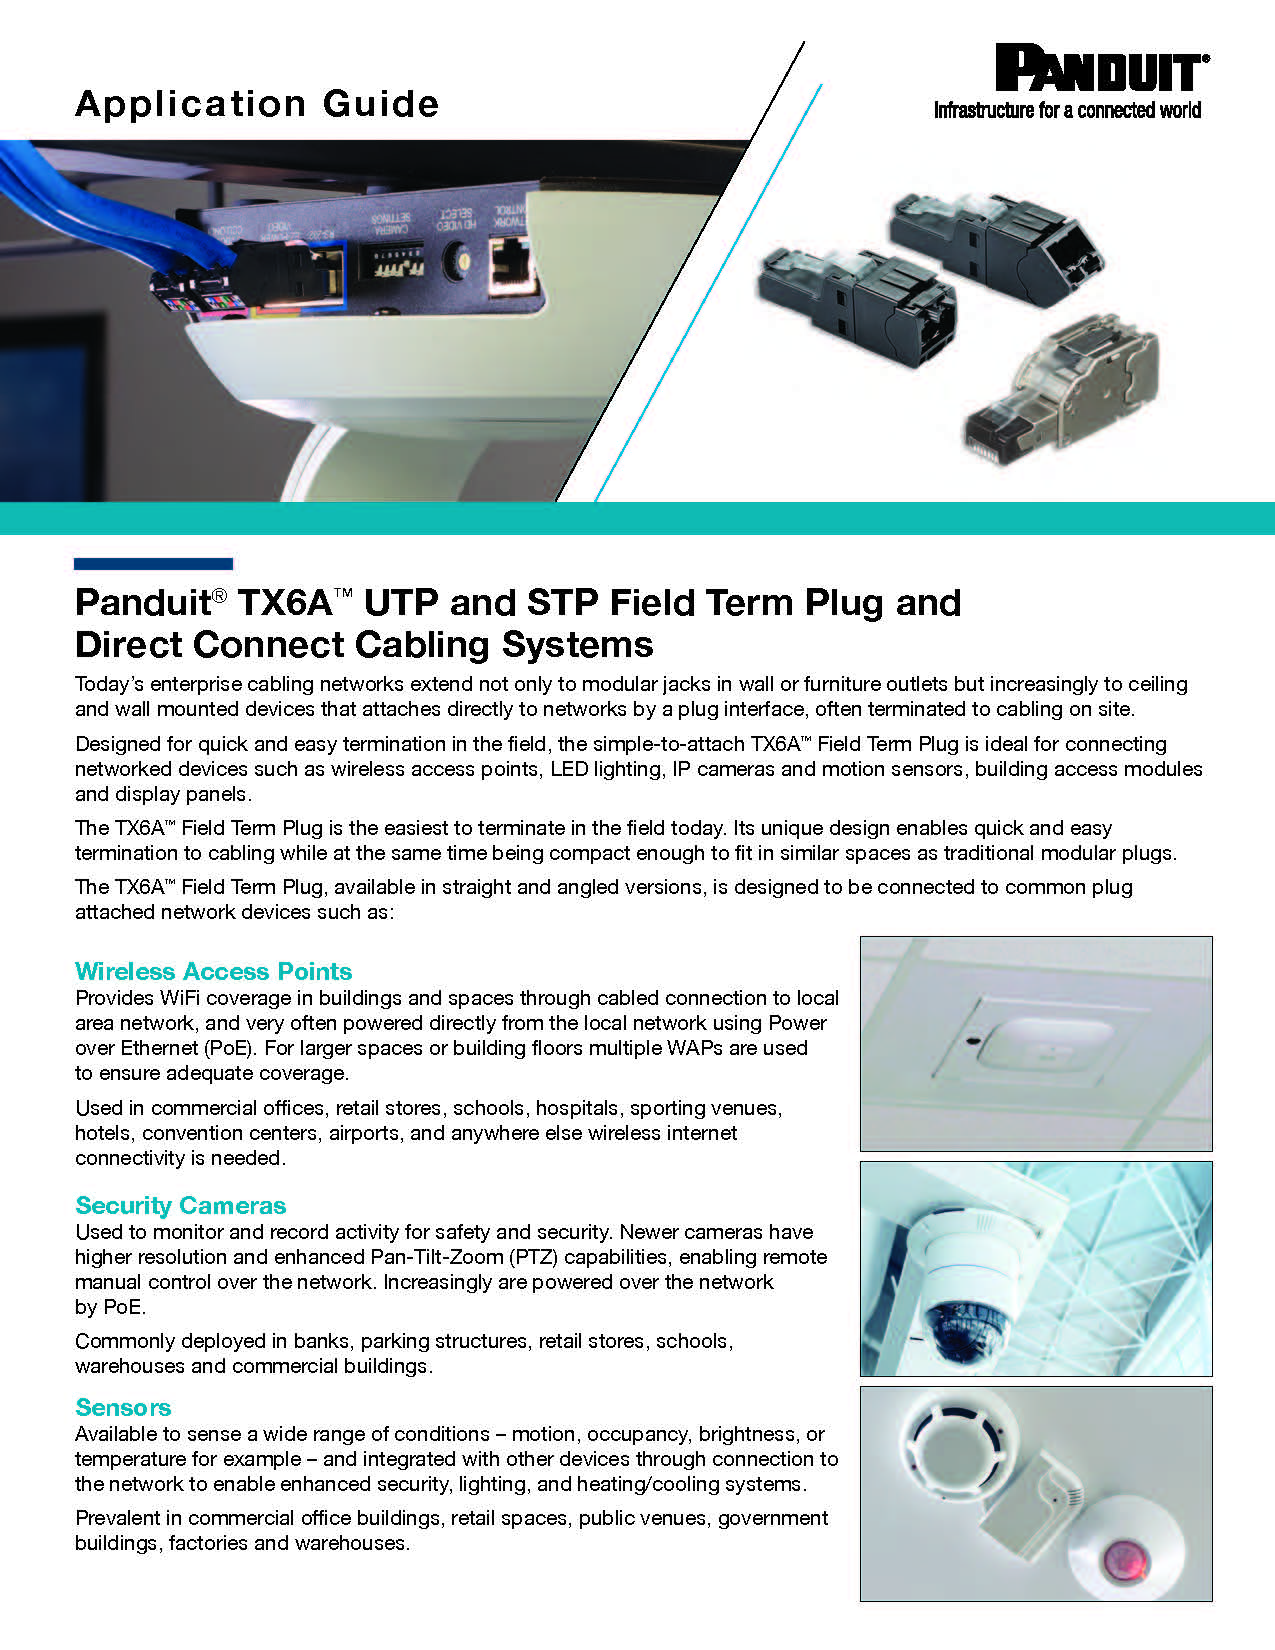 Field Term Plug and Direct Connect Cabling Systems Application Guide